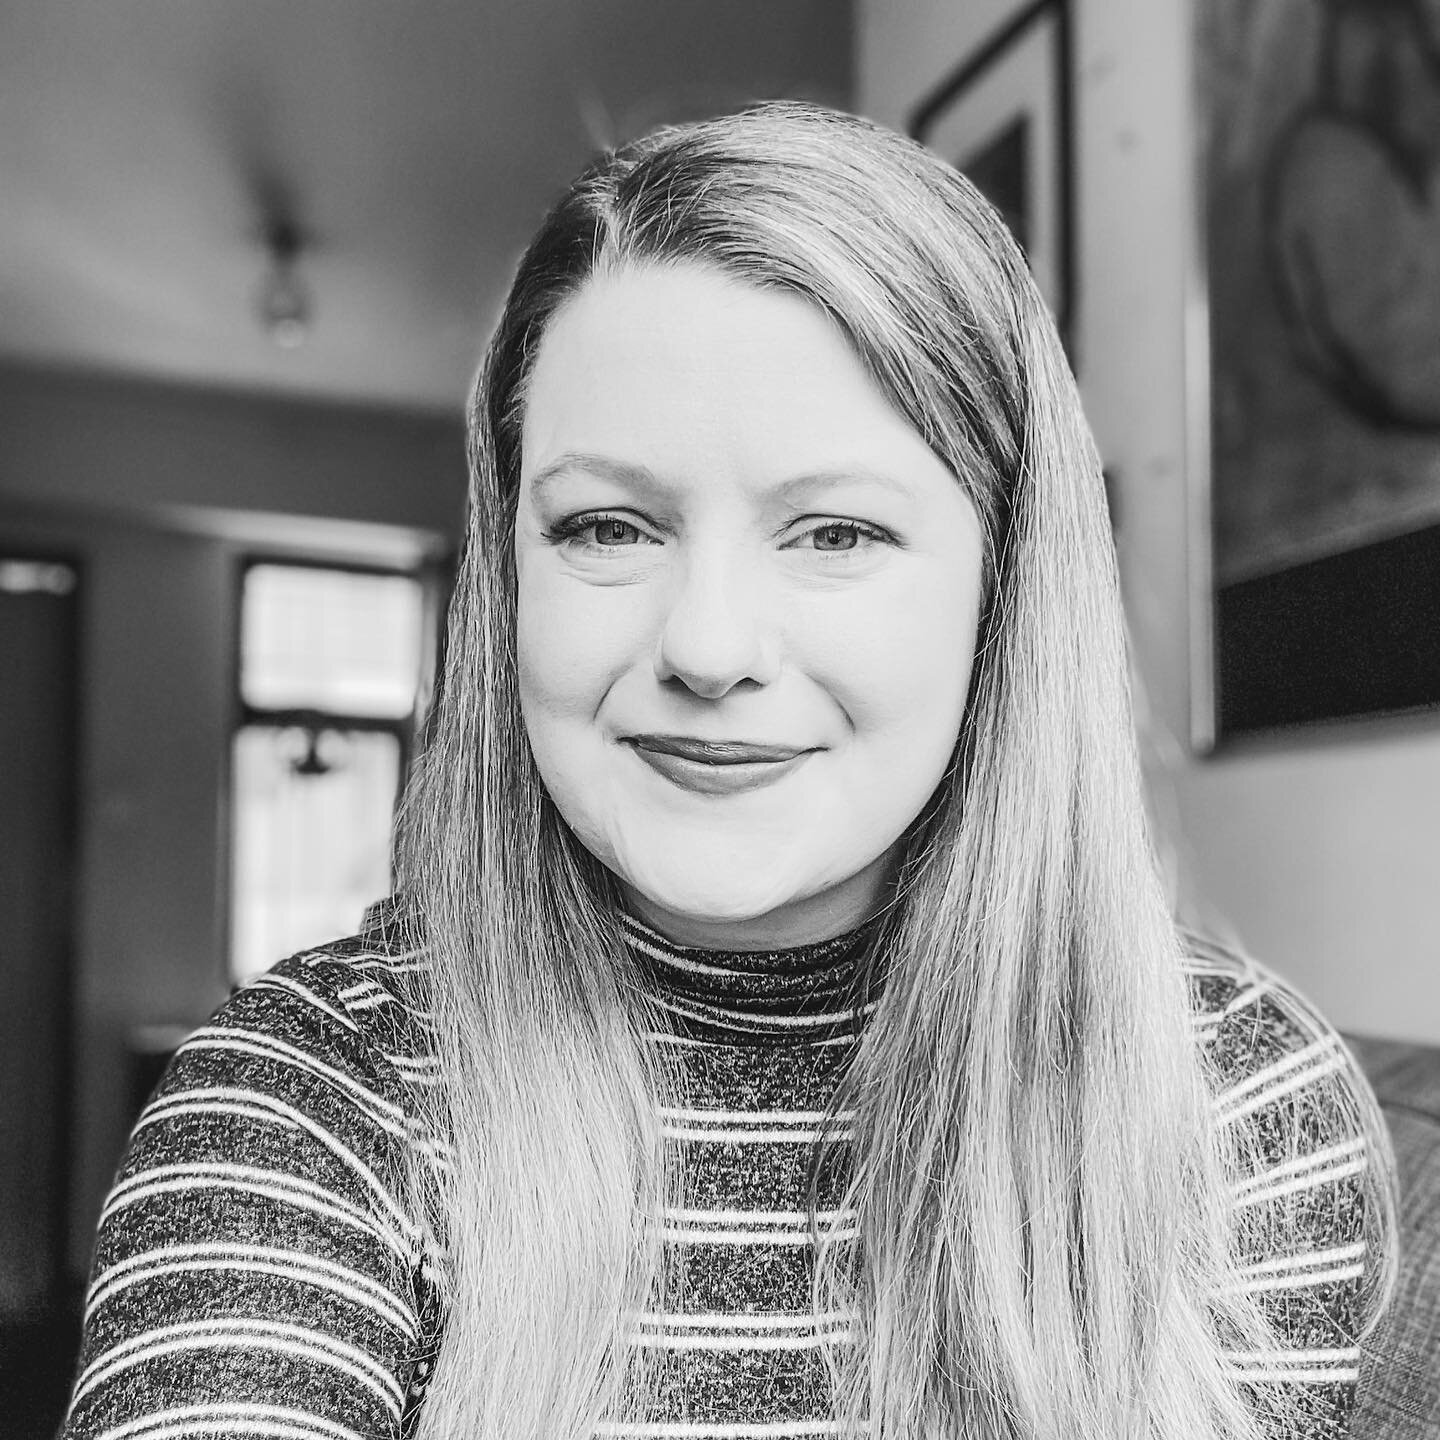 Hey guys, Beth here. It's been a long time since I've posted anything to @darvellmarketing and a lot has happened behind the scenes for me. I'll be honest... an international move, ongoing visa process, increased work responsibilities at my main comp